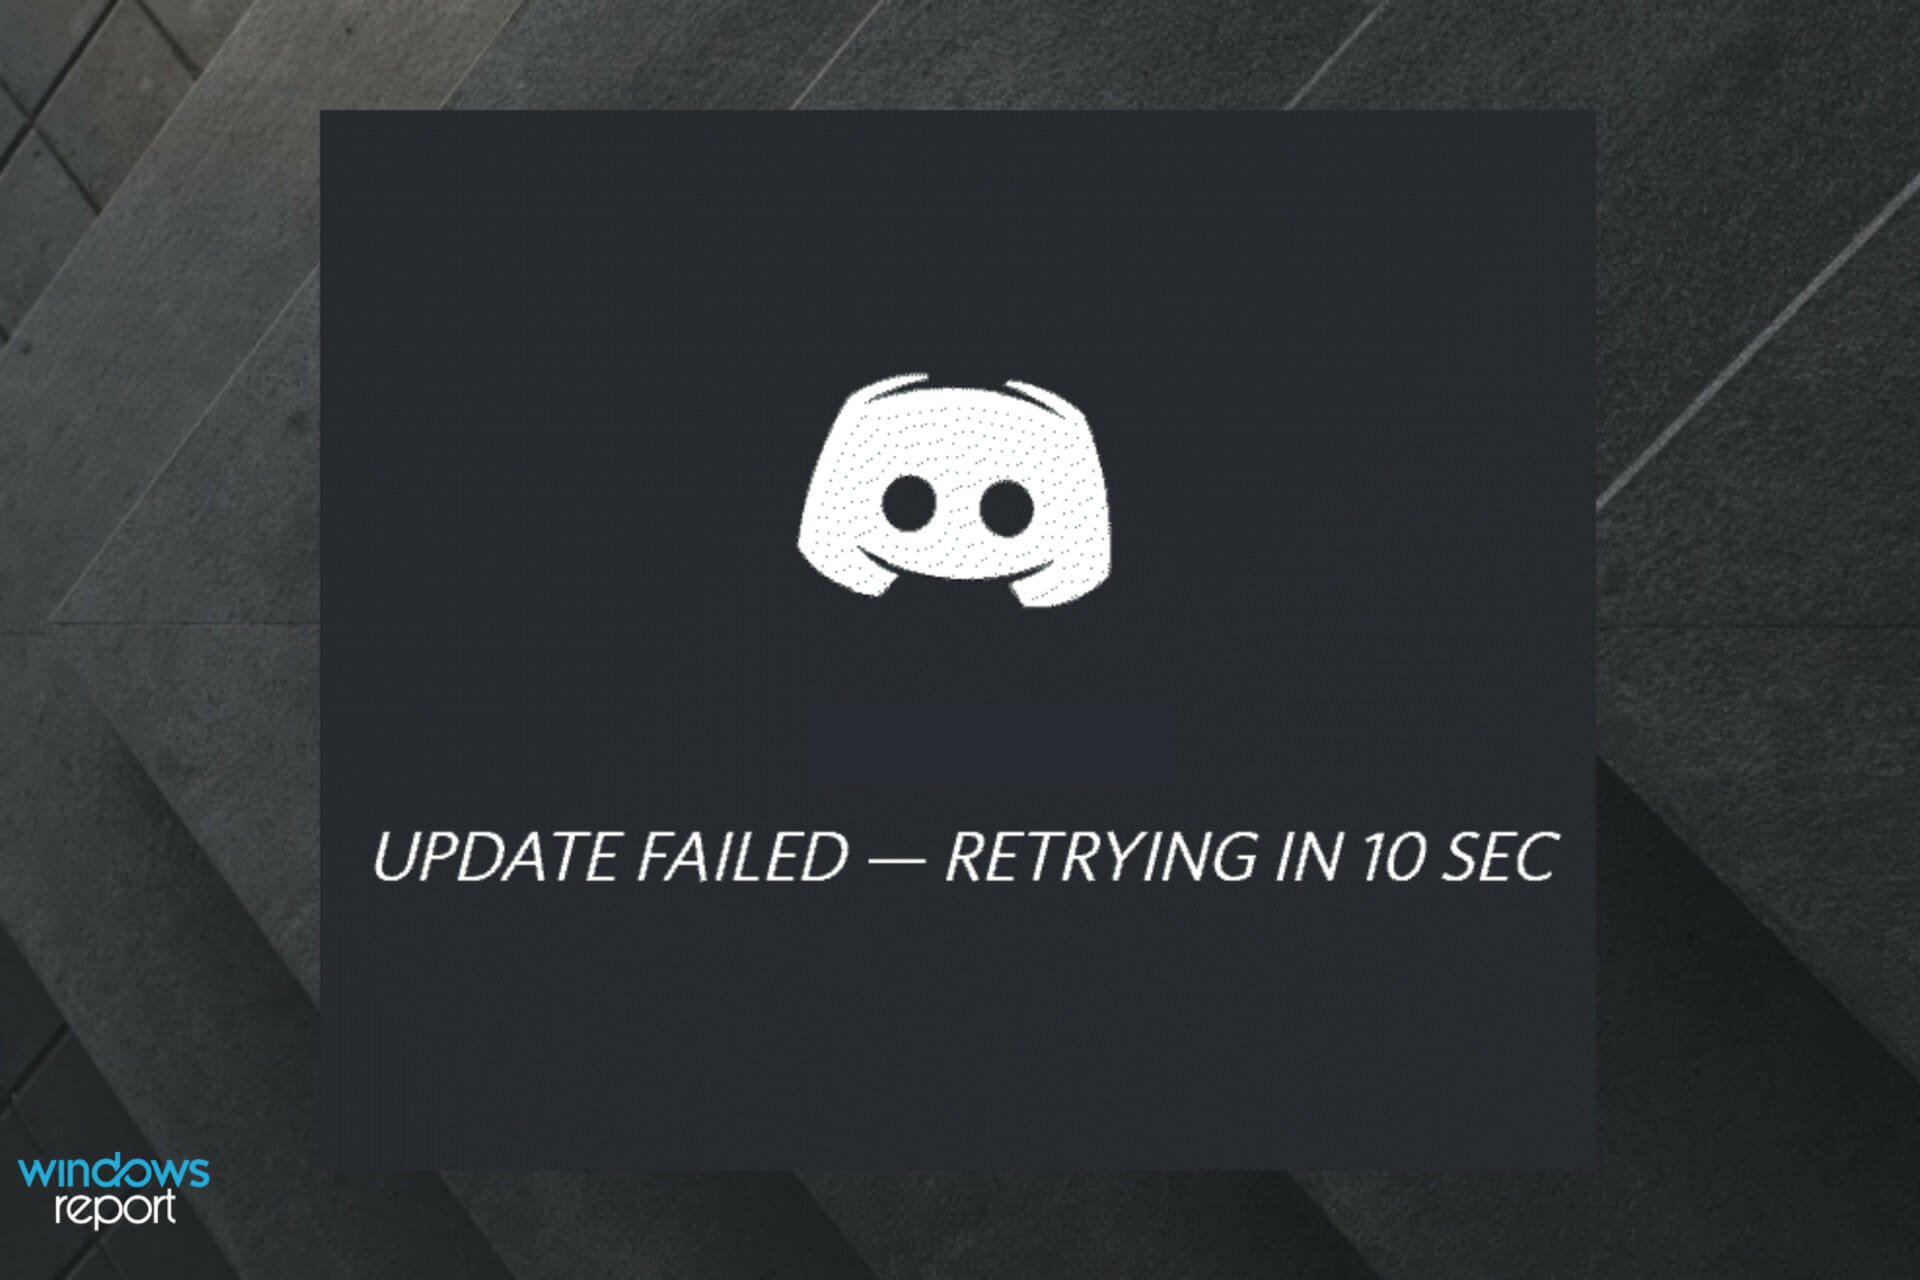 Discord won’t update on Windows 10 PCs? Solve it with ease